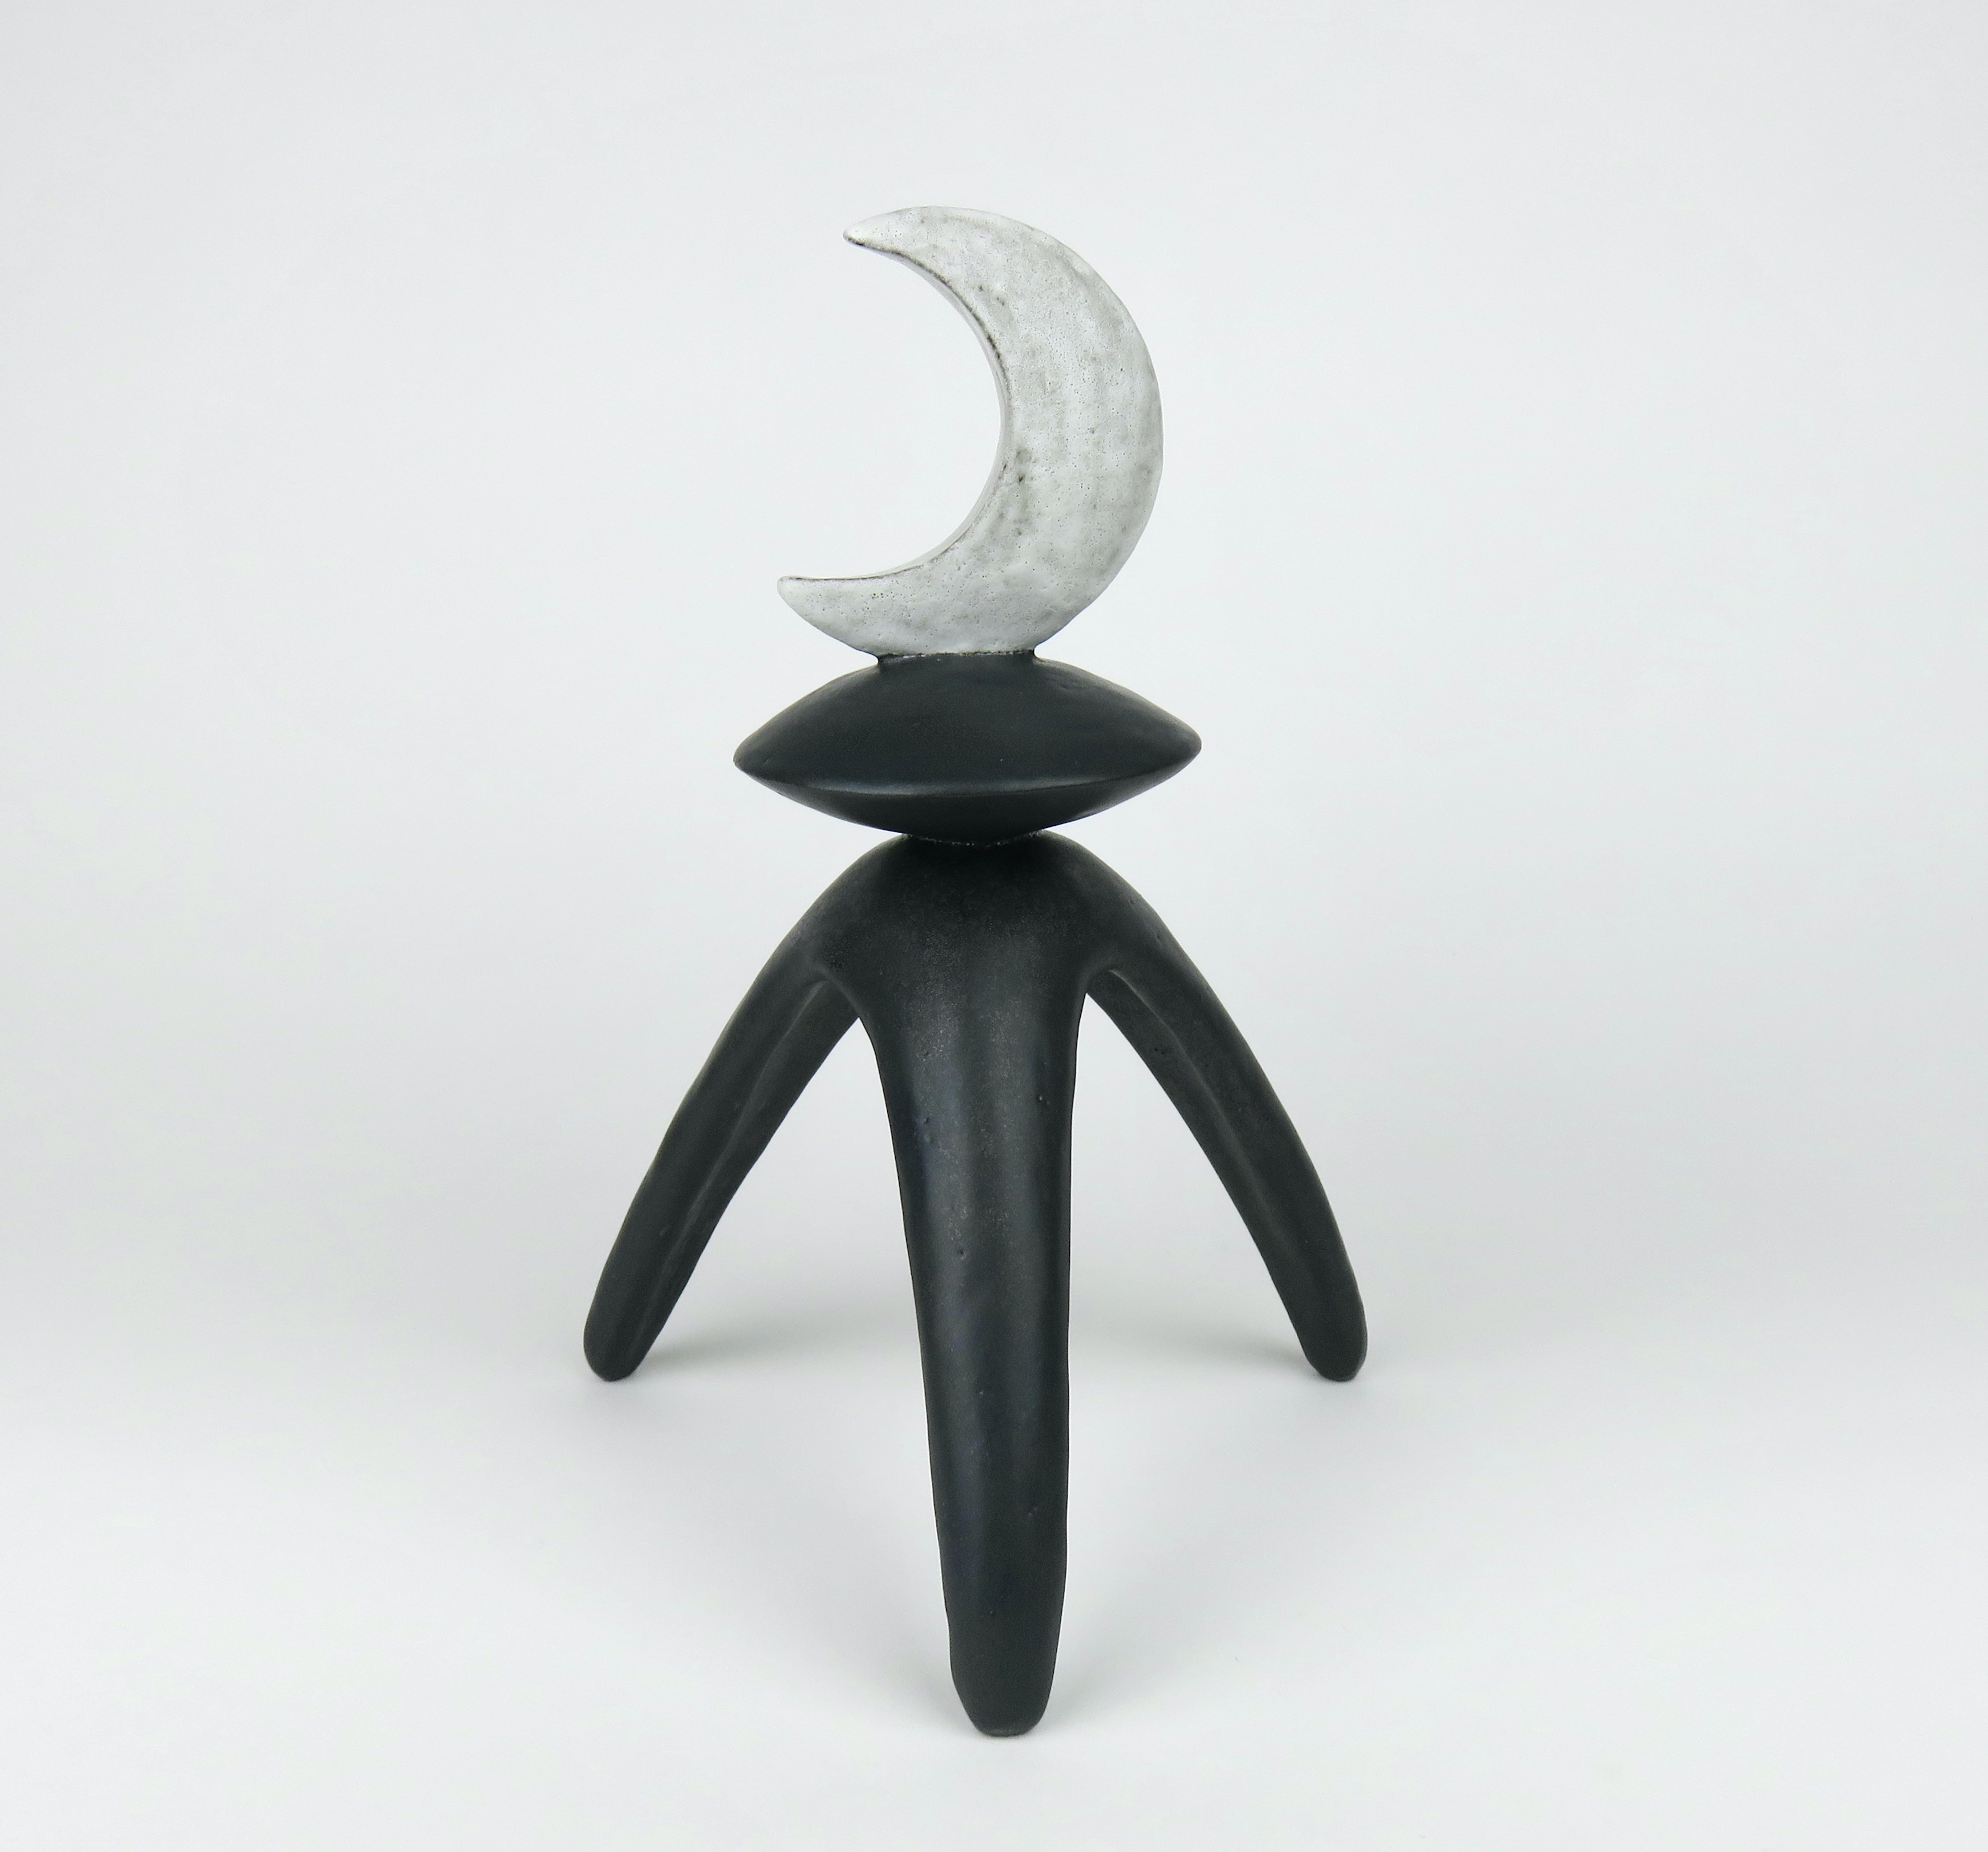 American Moon Phase Totems, White on Black Legs, Hand Built Ceramic by Helena Starcevic For Sale